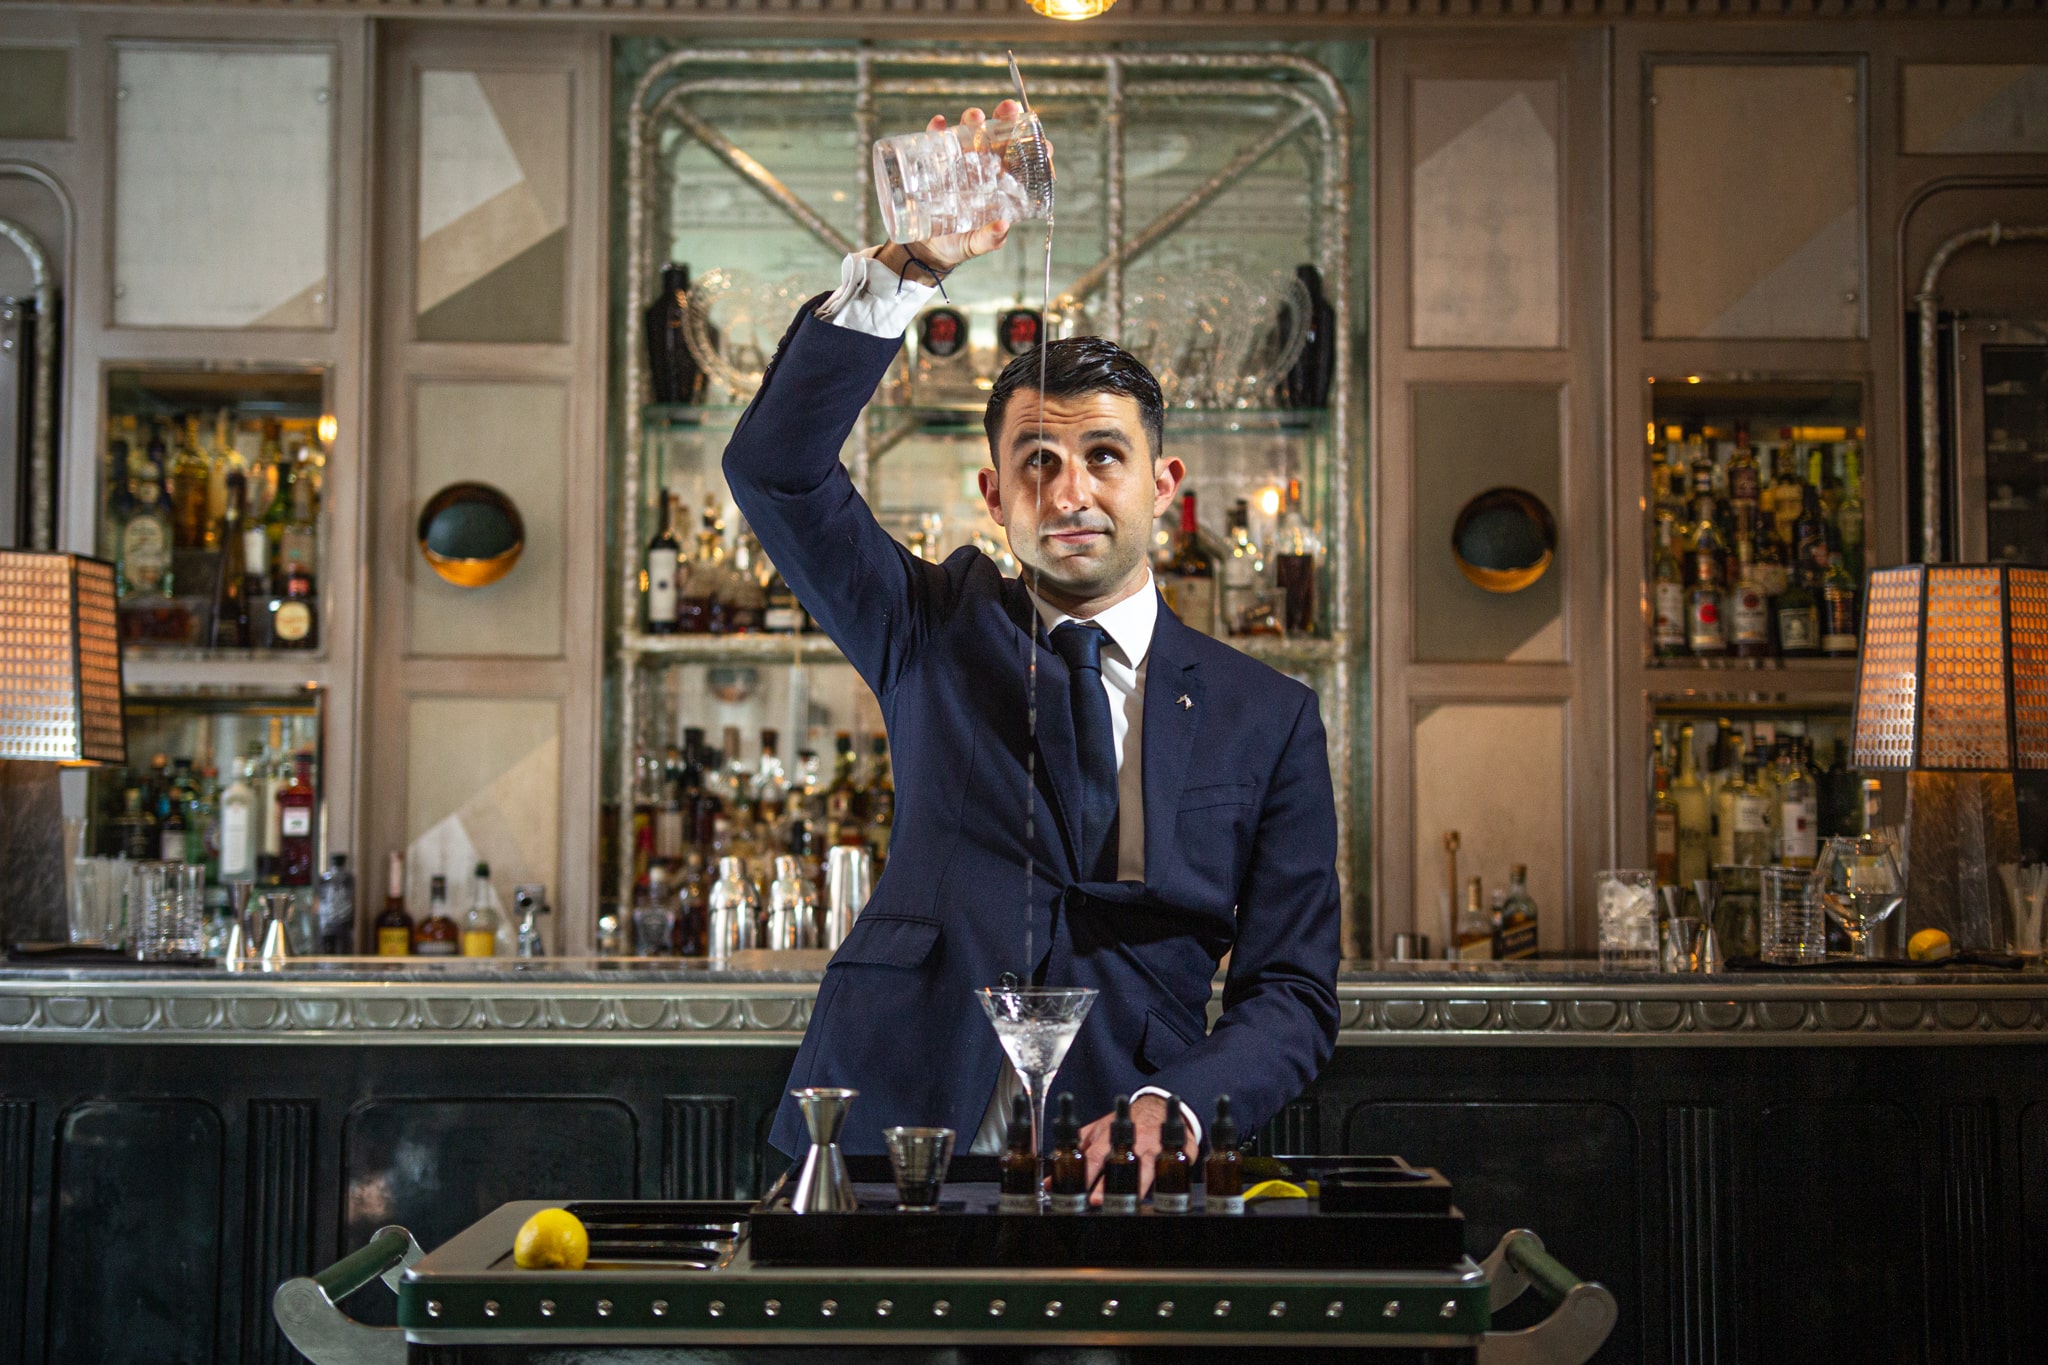 50 Of The World's Best Bartenders Are Coming To Sydney For An Epic